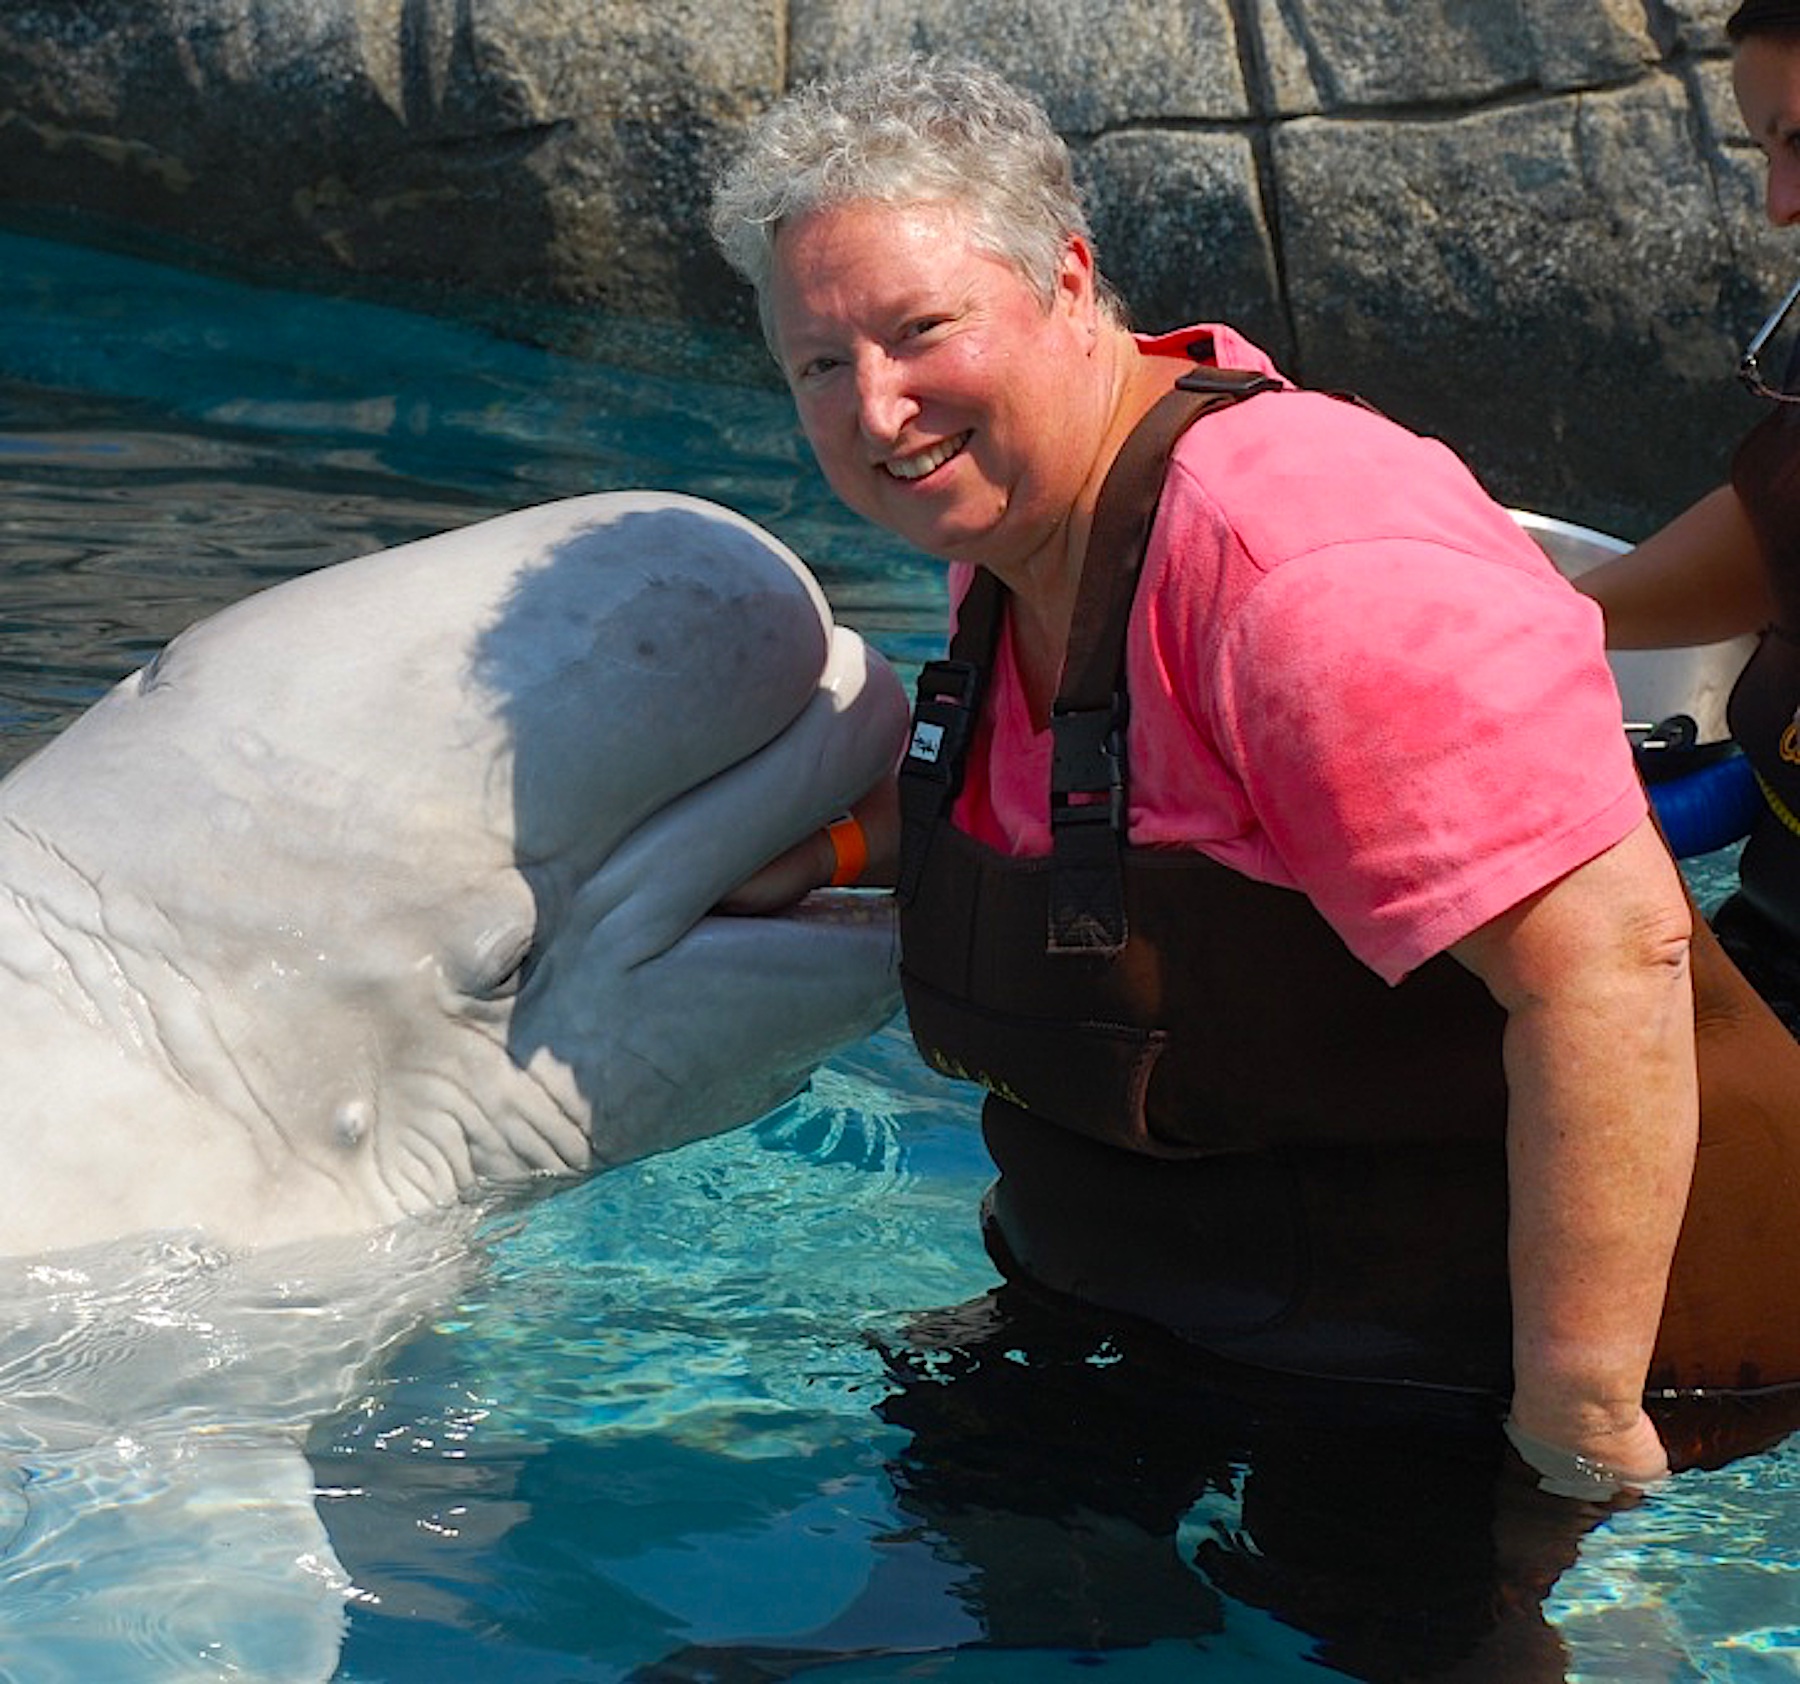 Marine science offers students a world of possibilities. In 2010 Terri Kirby Hathaway met Naku, a beluga whale, at Mystic Aquarium in Connecticut.